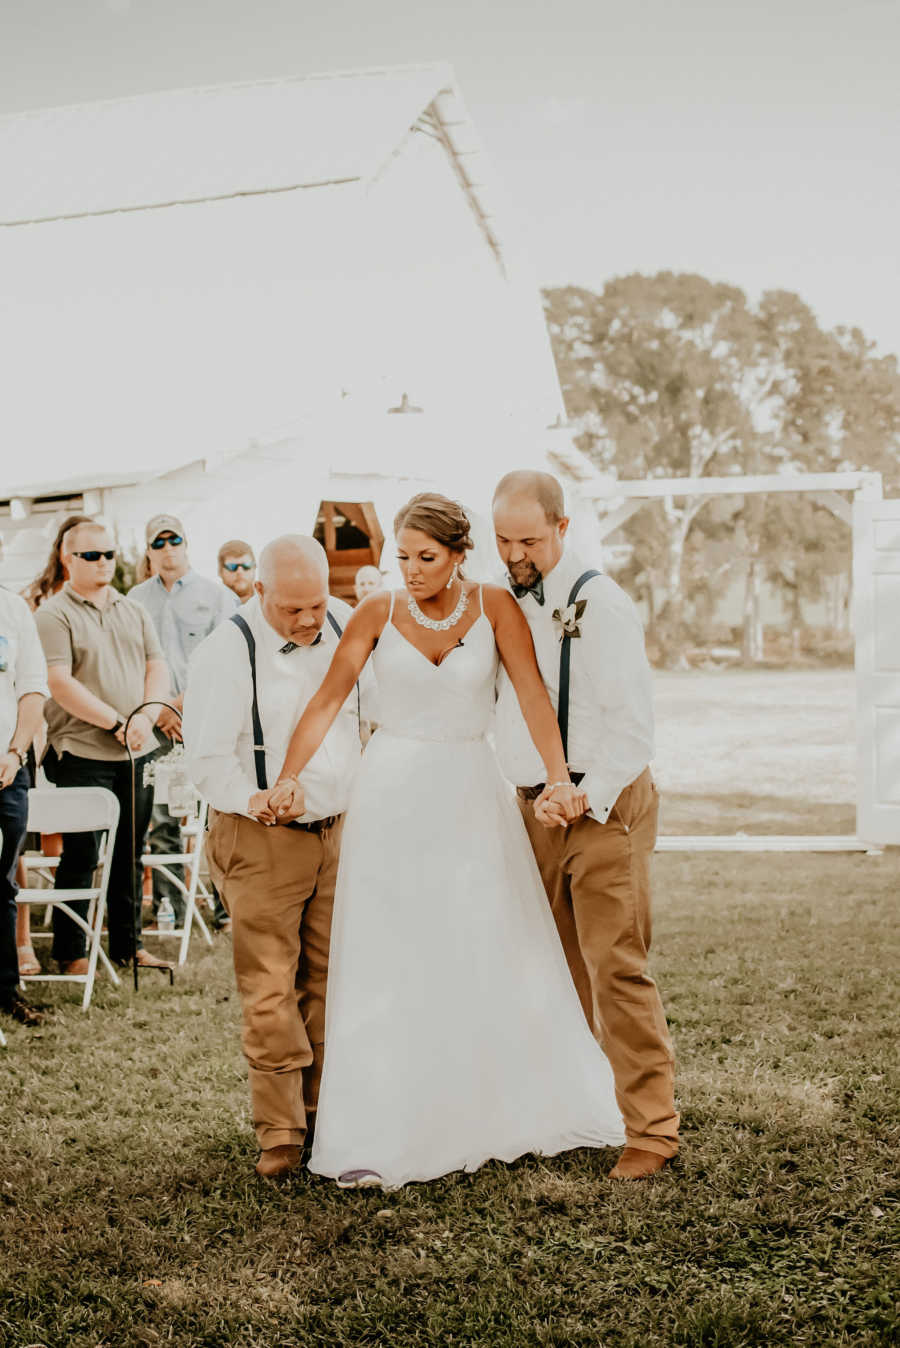 Paralyzed bride walks down aisle with help from two men at outdoor wedding